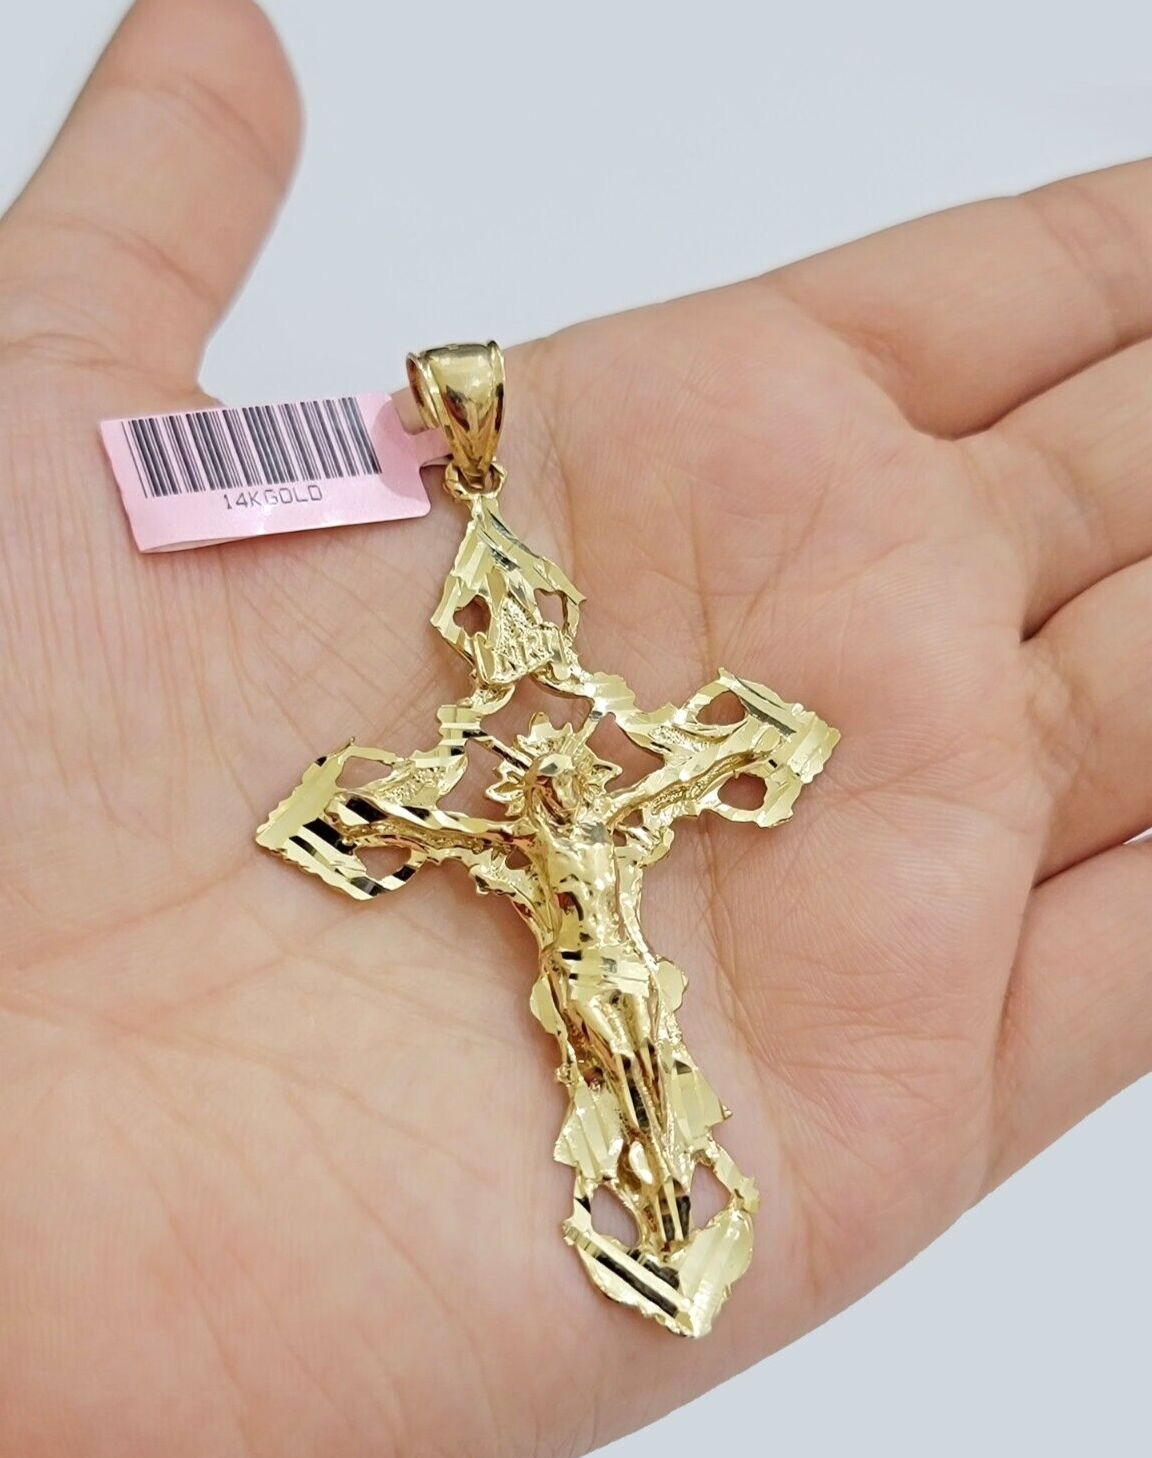 14k Yellow Gold Jesus Cross Charm Pendant 3 Inches Crucifix Chain Necklace SALE